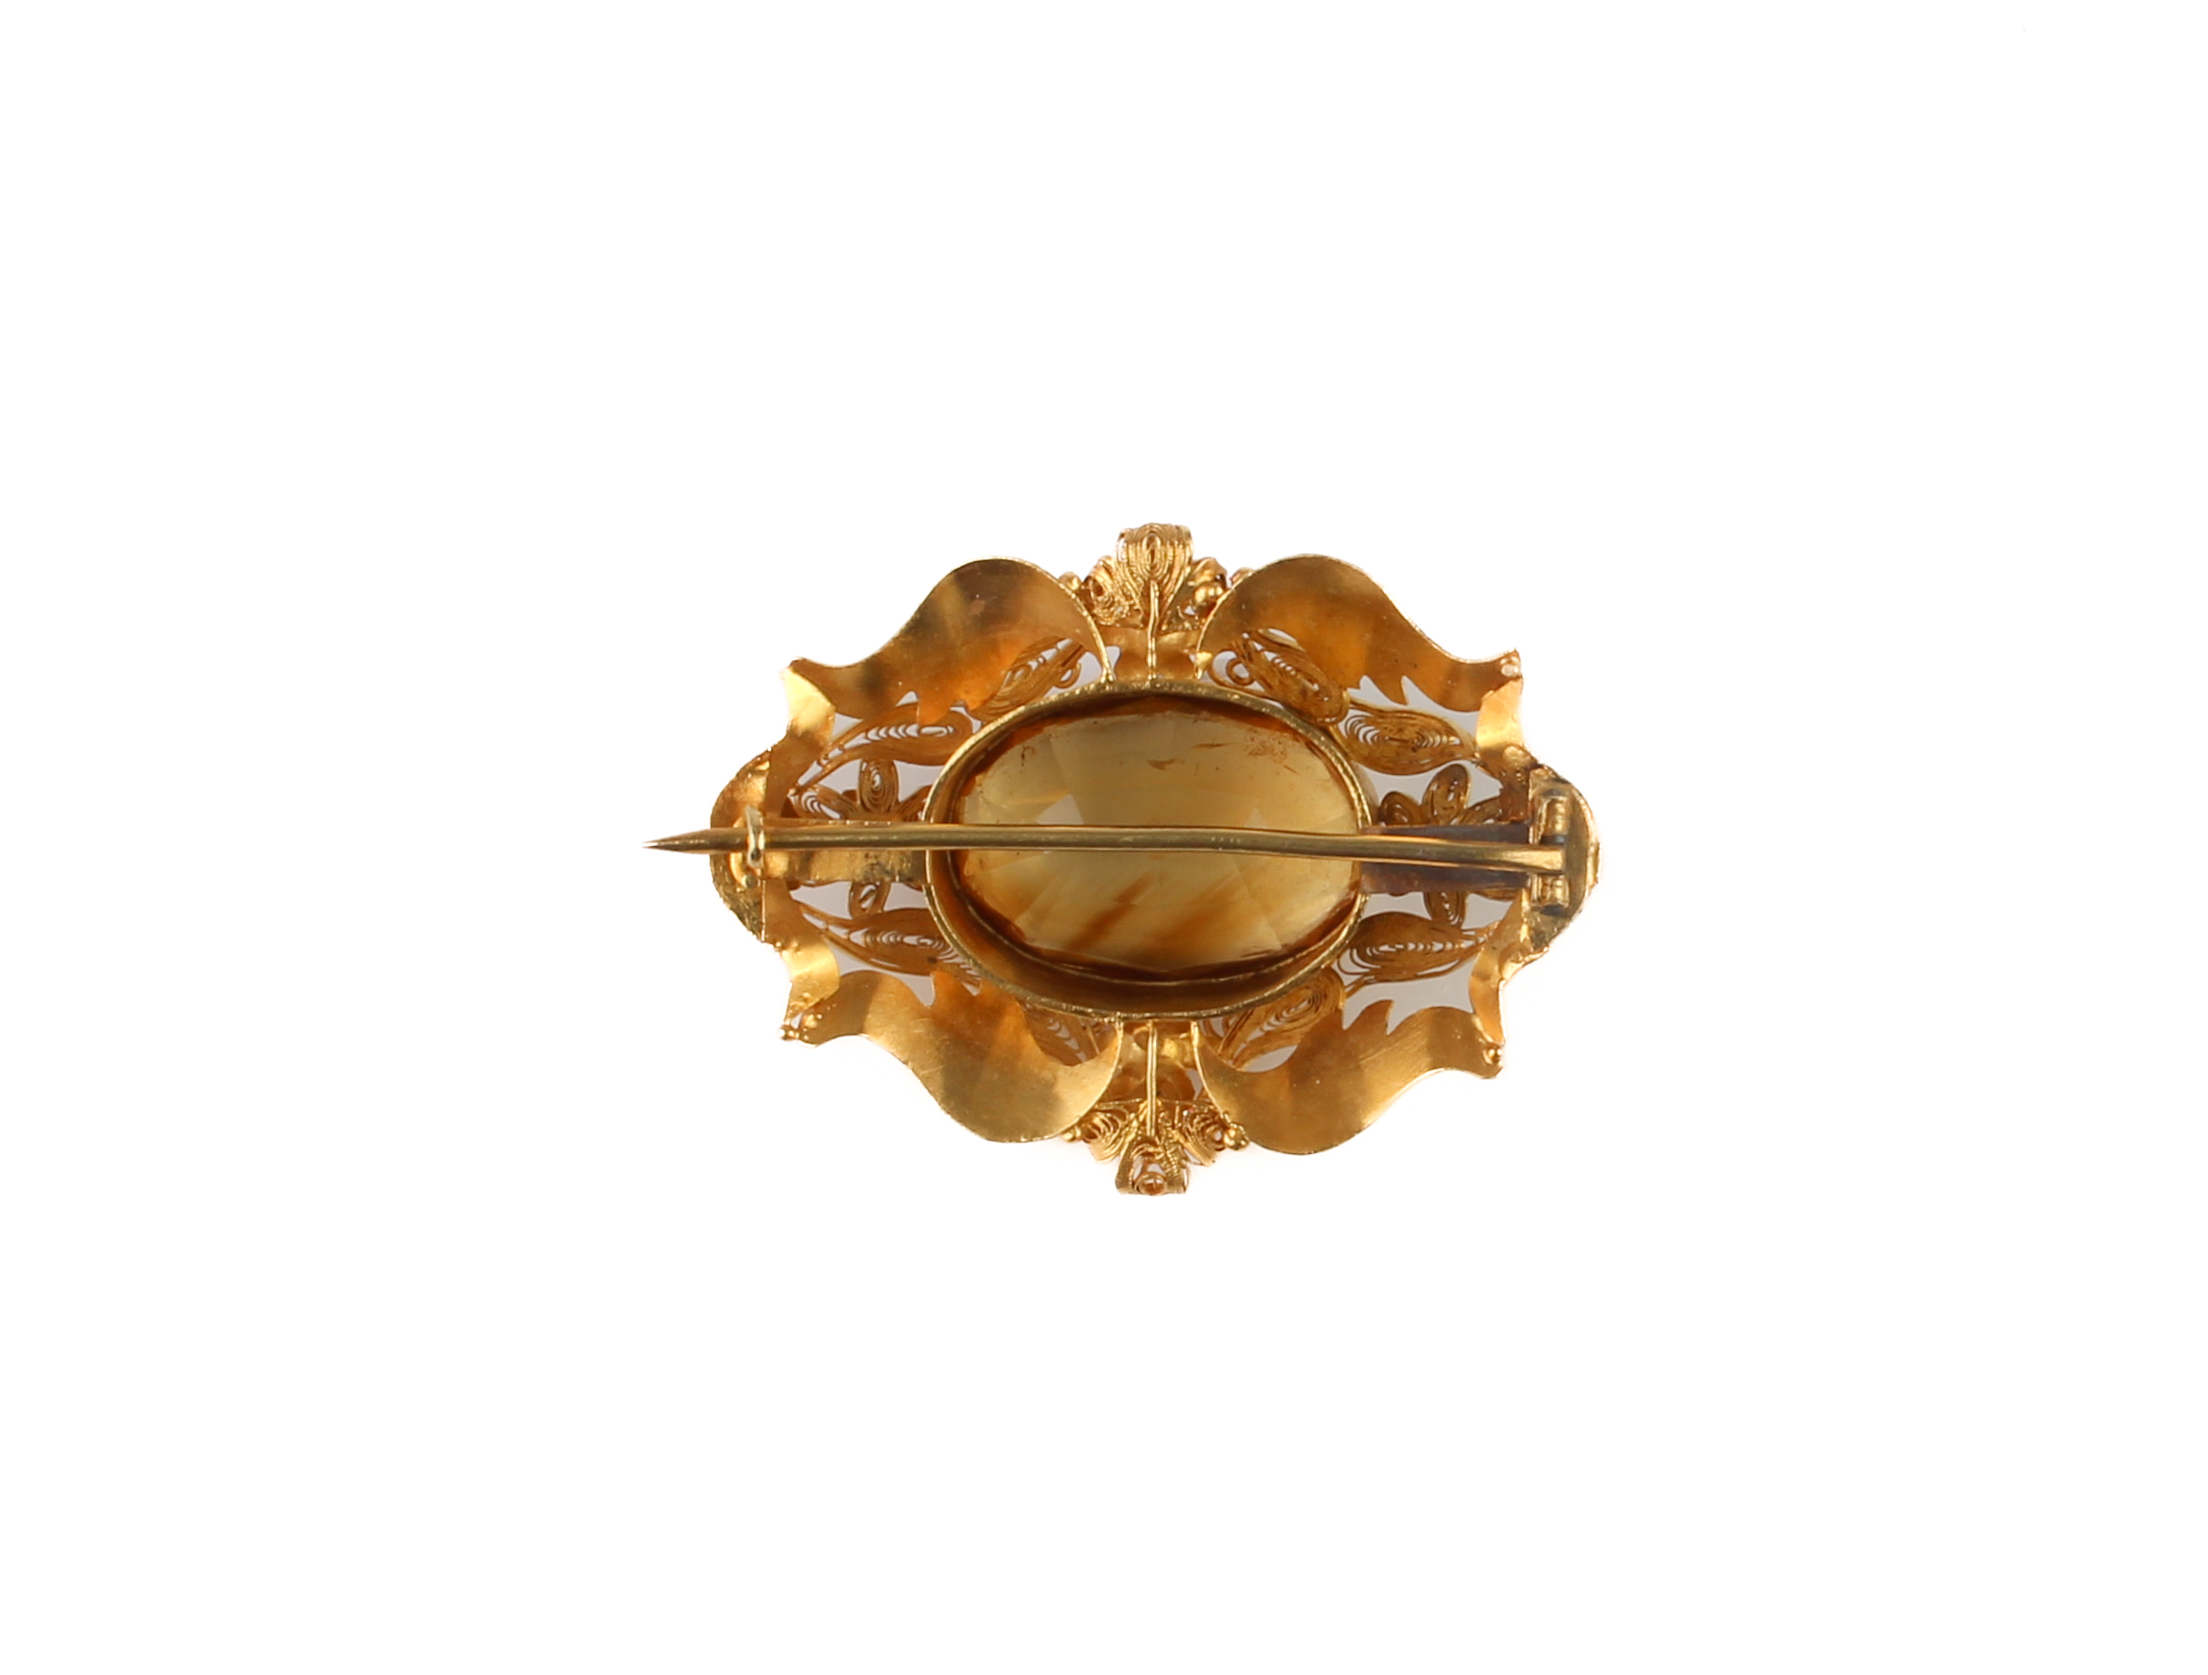 A mid-19th century 18ct gold and citrine brooch - the 21.5 x 14.5mm oval, mixed cut citrine - Image 3 of 4